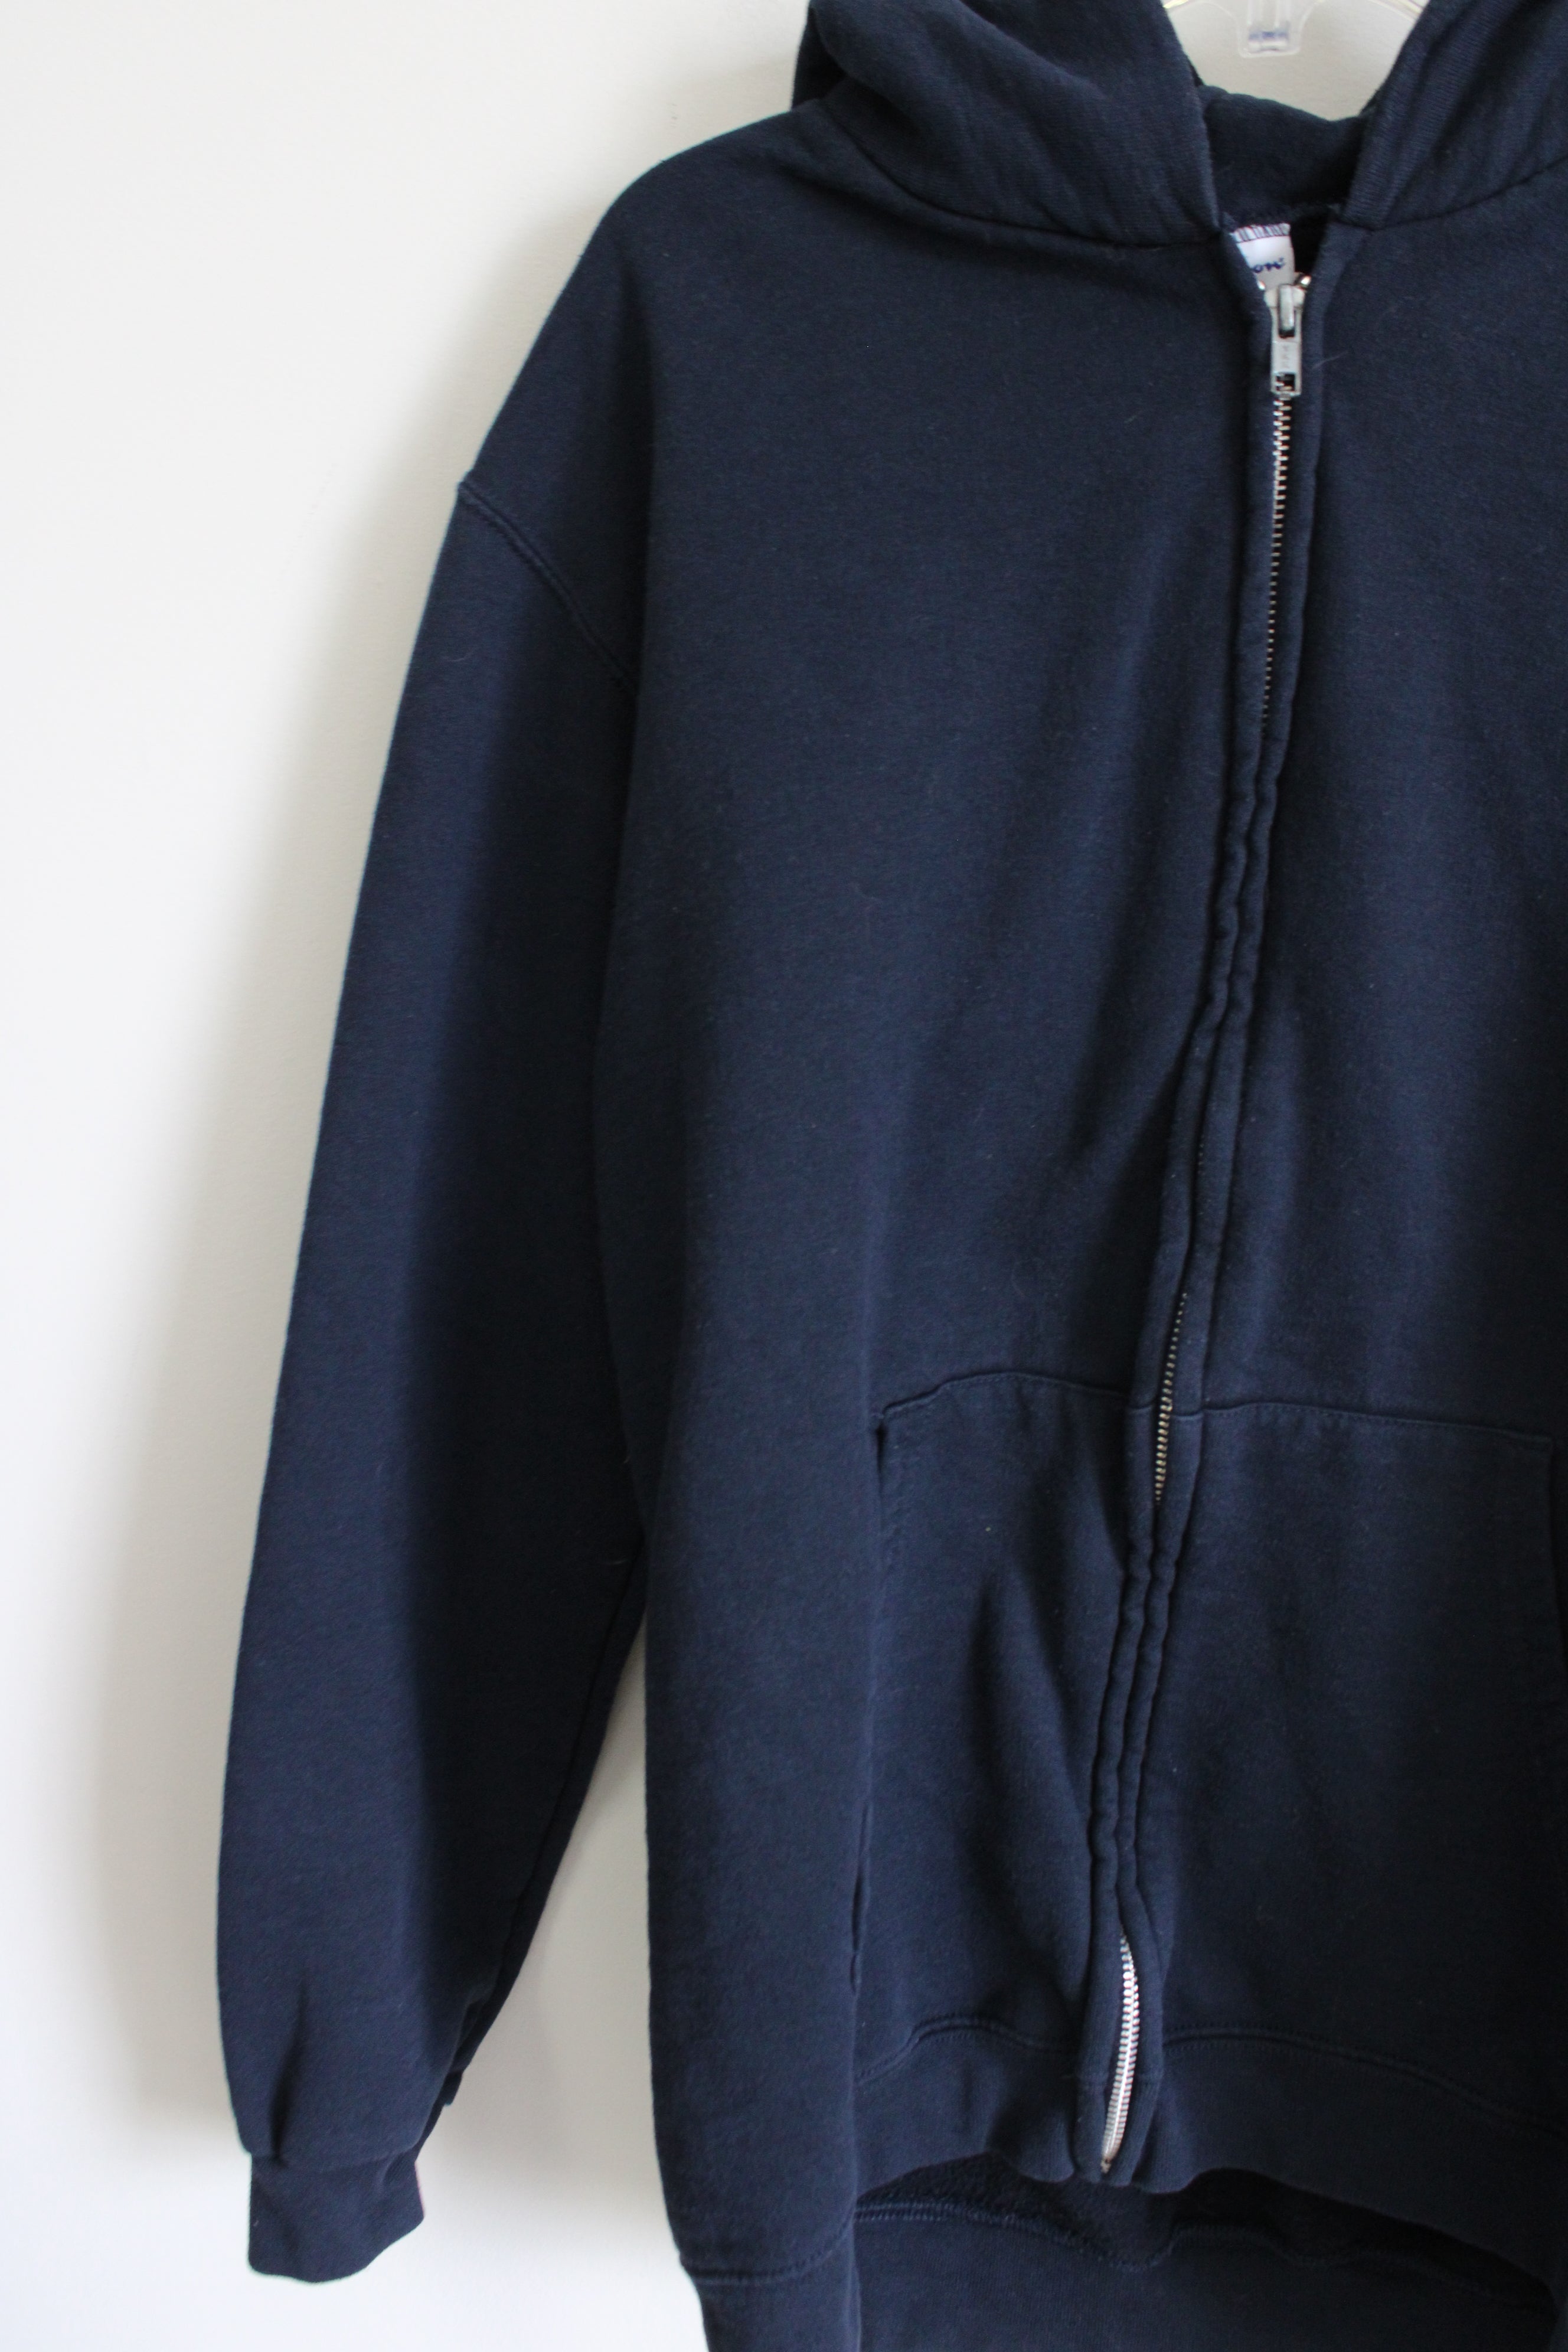 Champion Navy Zip Up Hoodie | Youth XL (18/20)